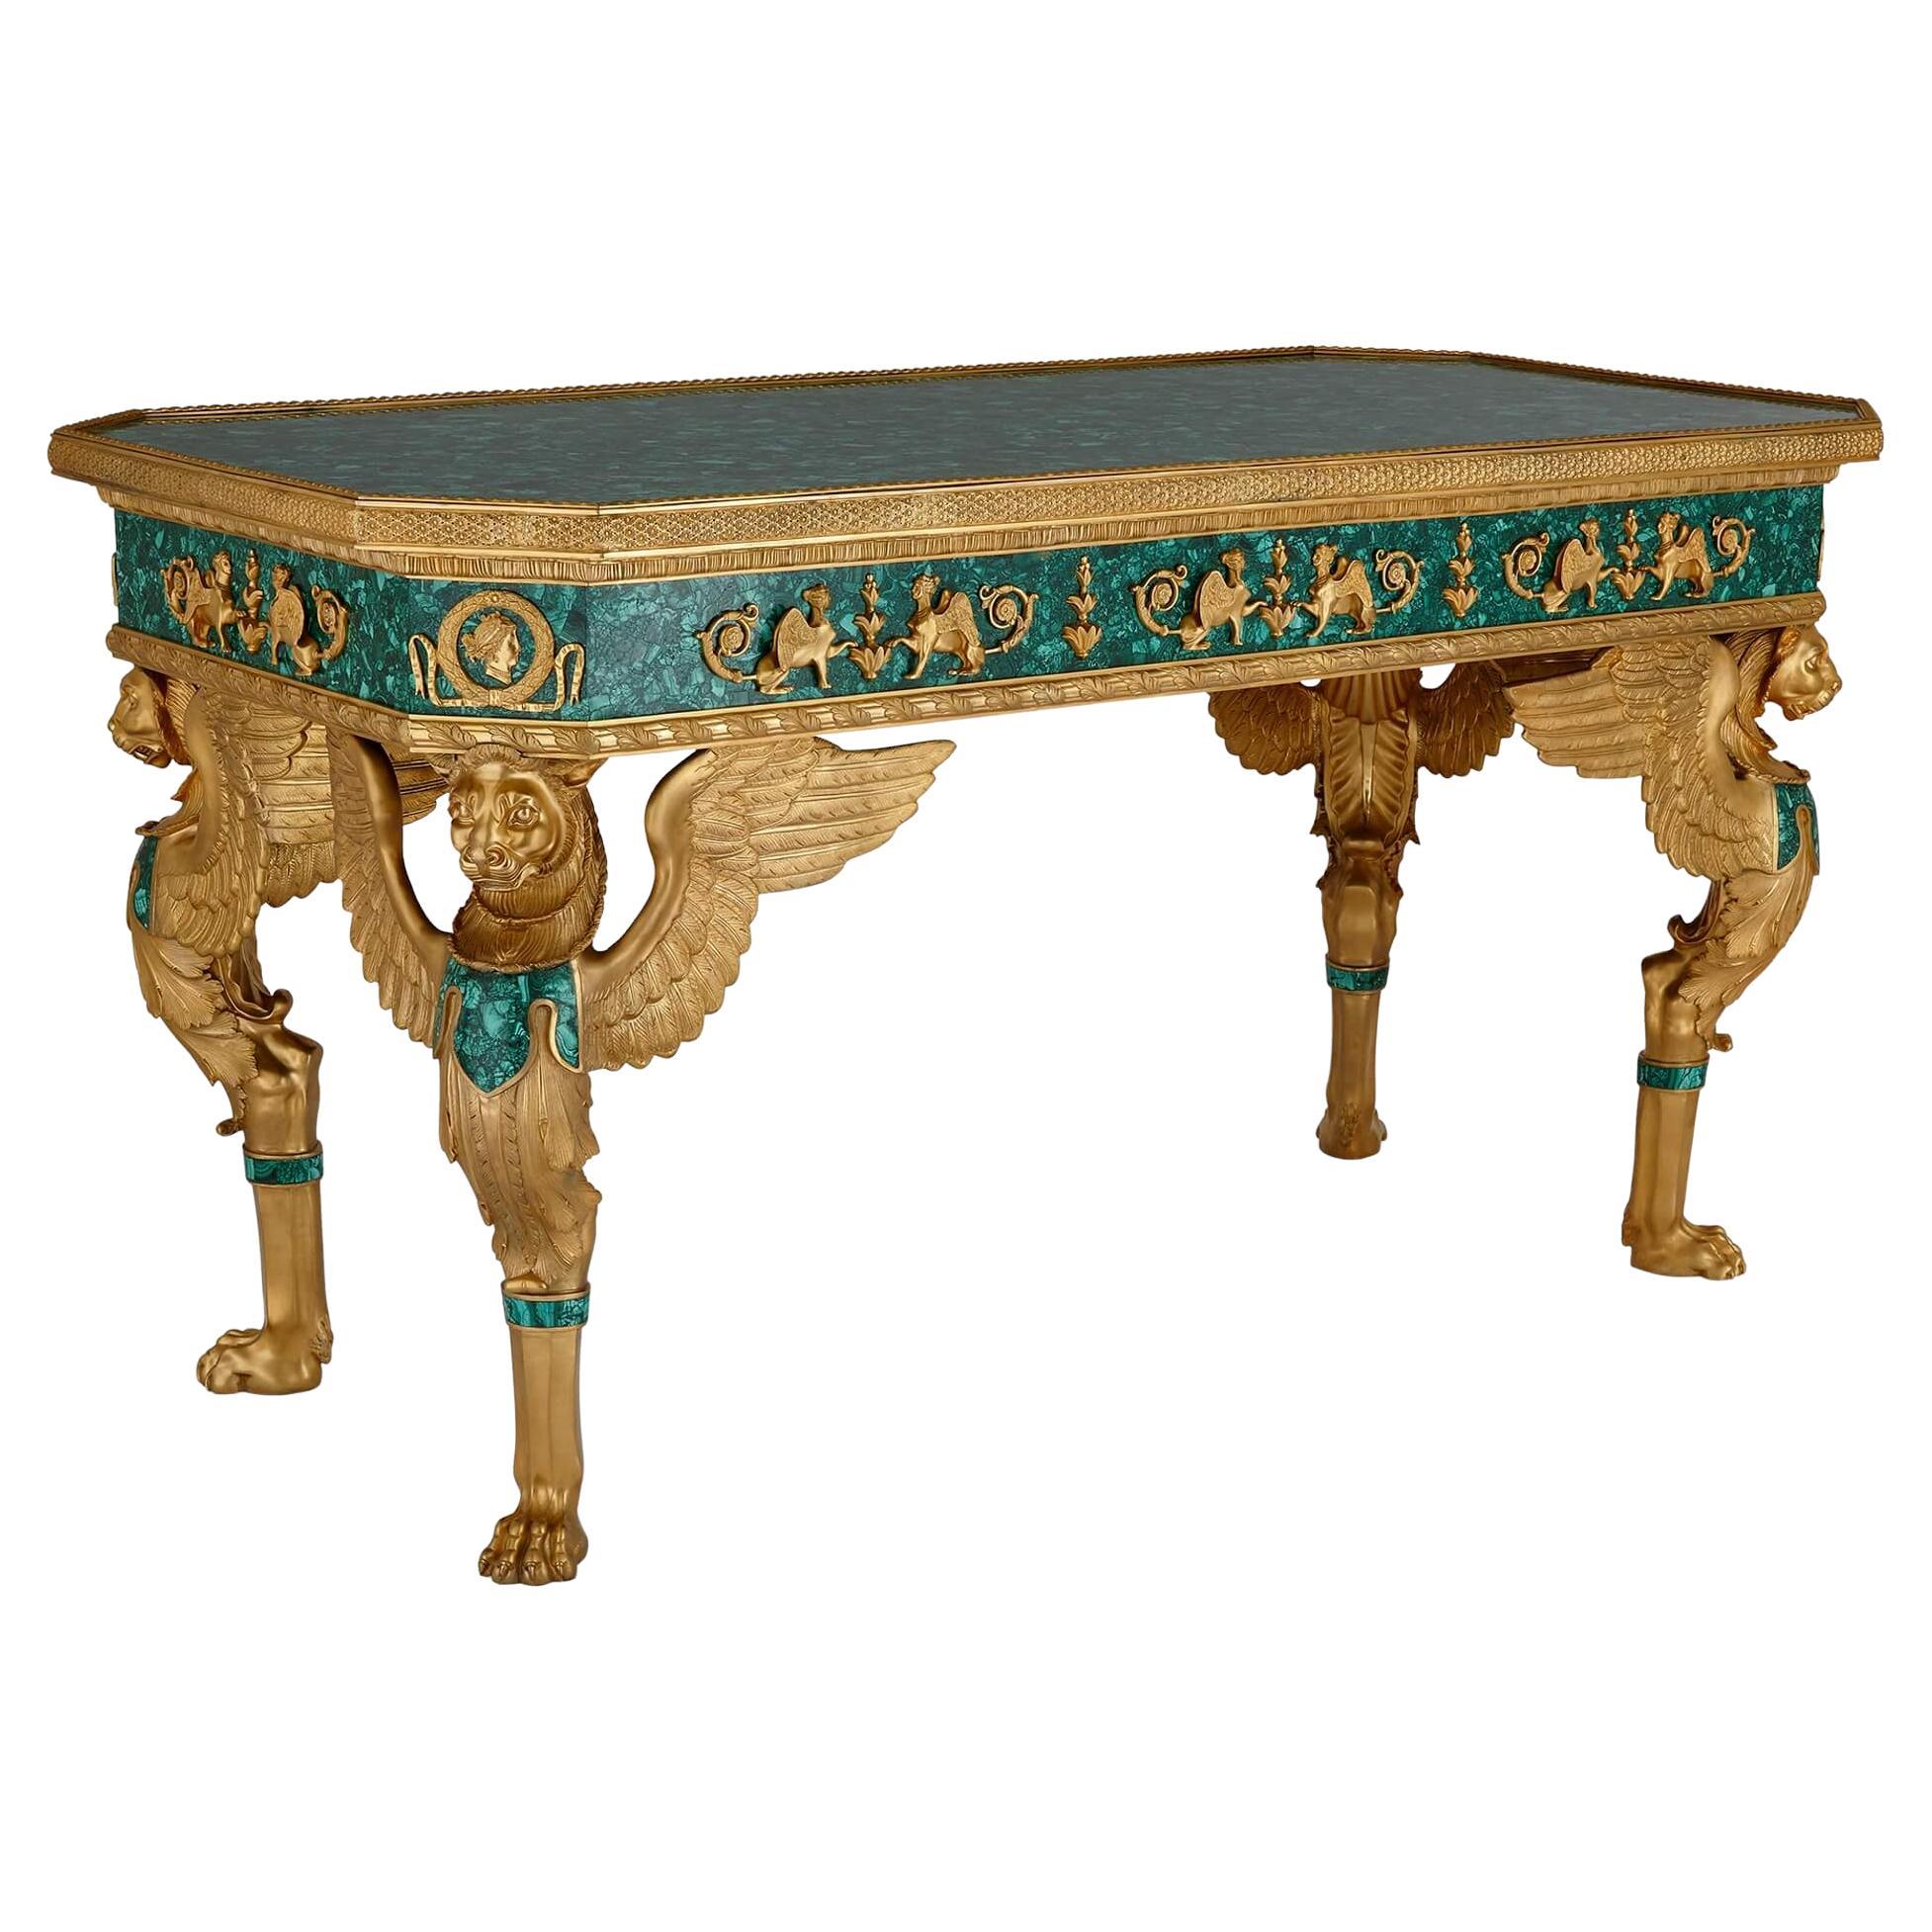 Large French Empire Style Gilt-Bronze and Malachite Centre Table